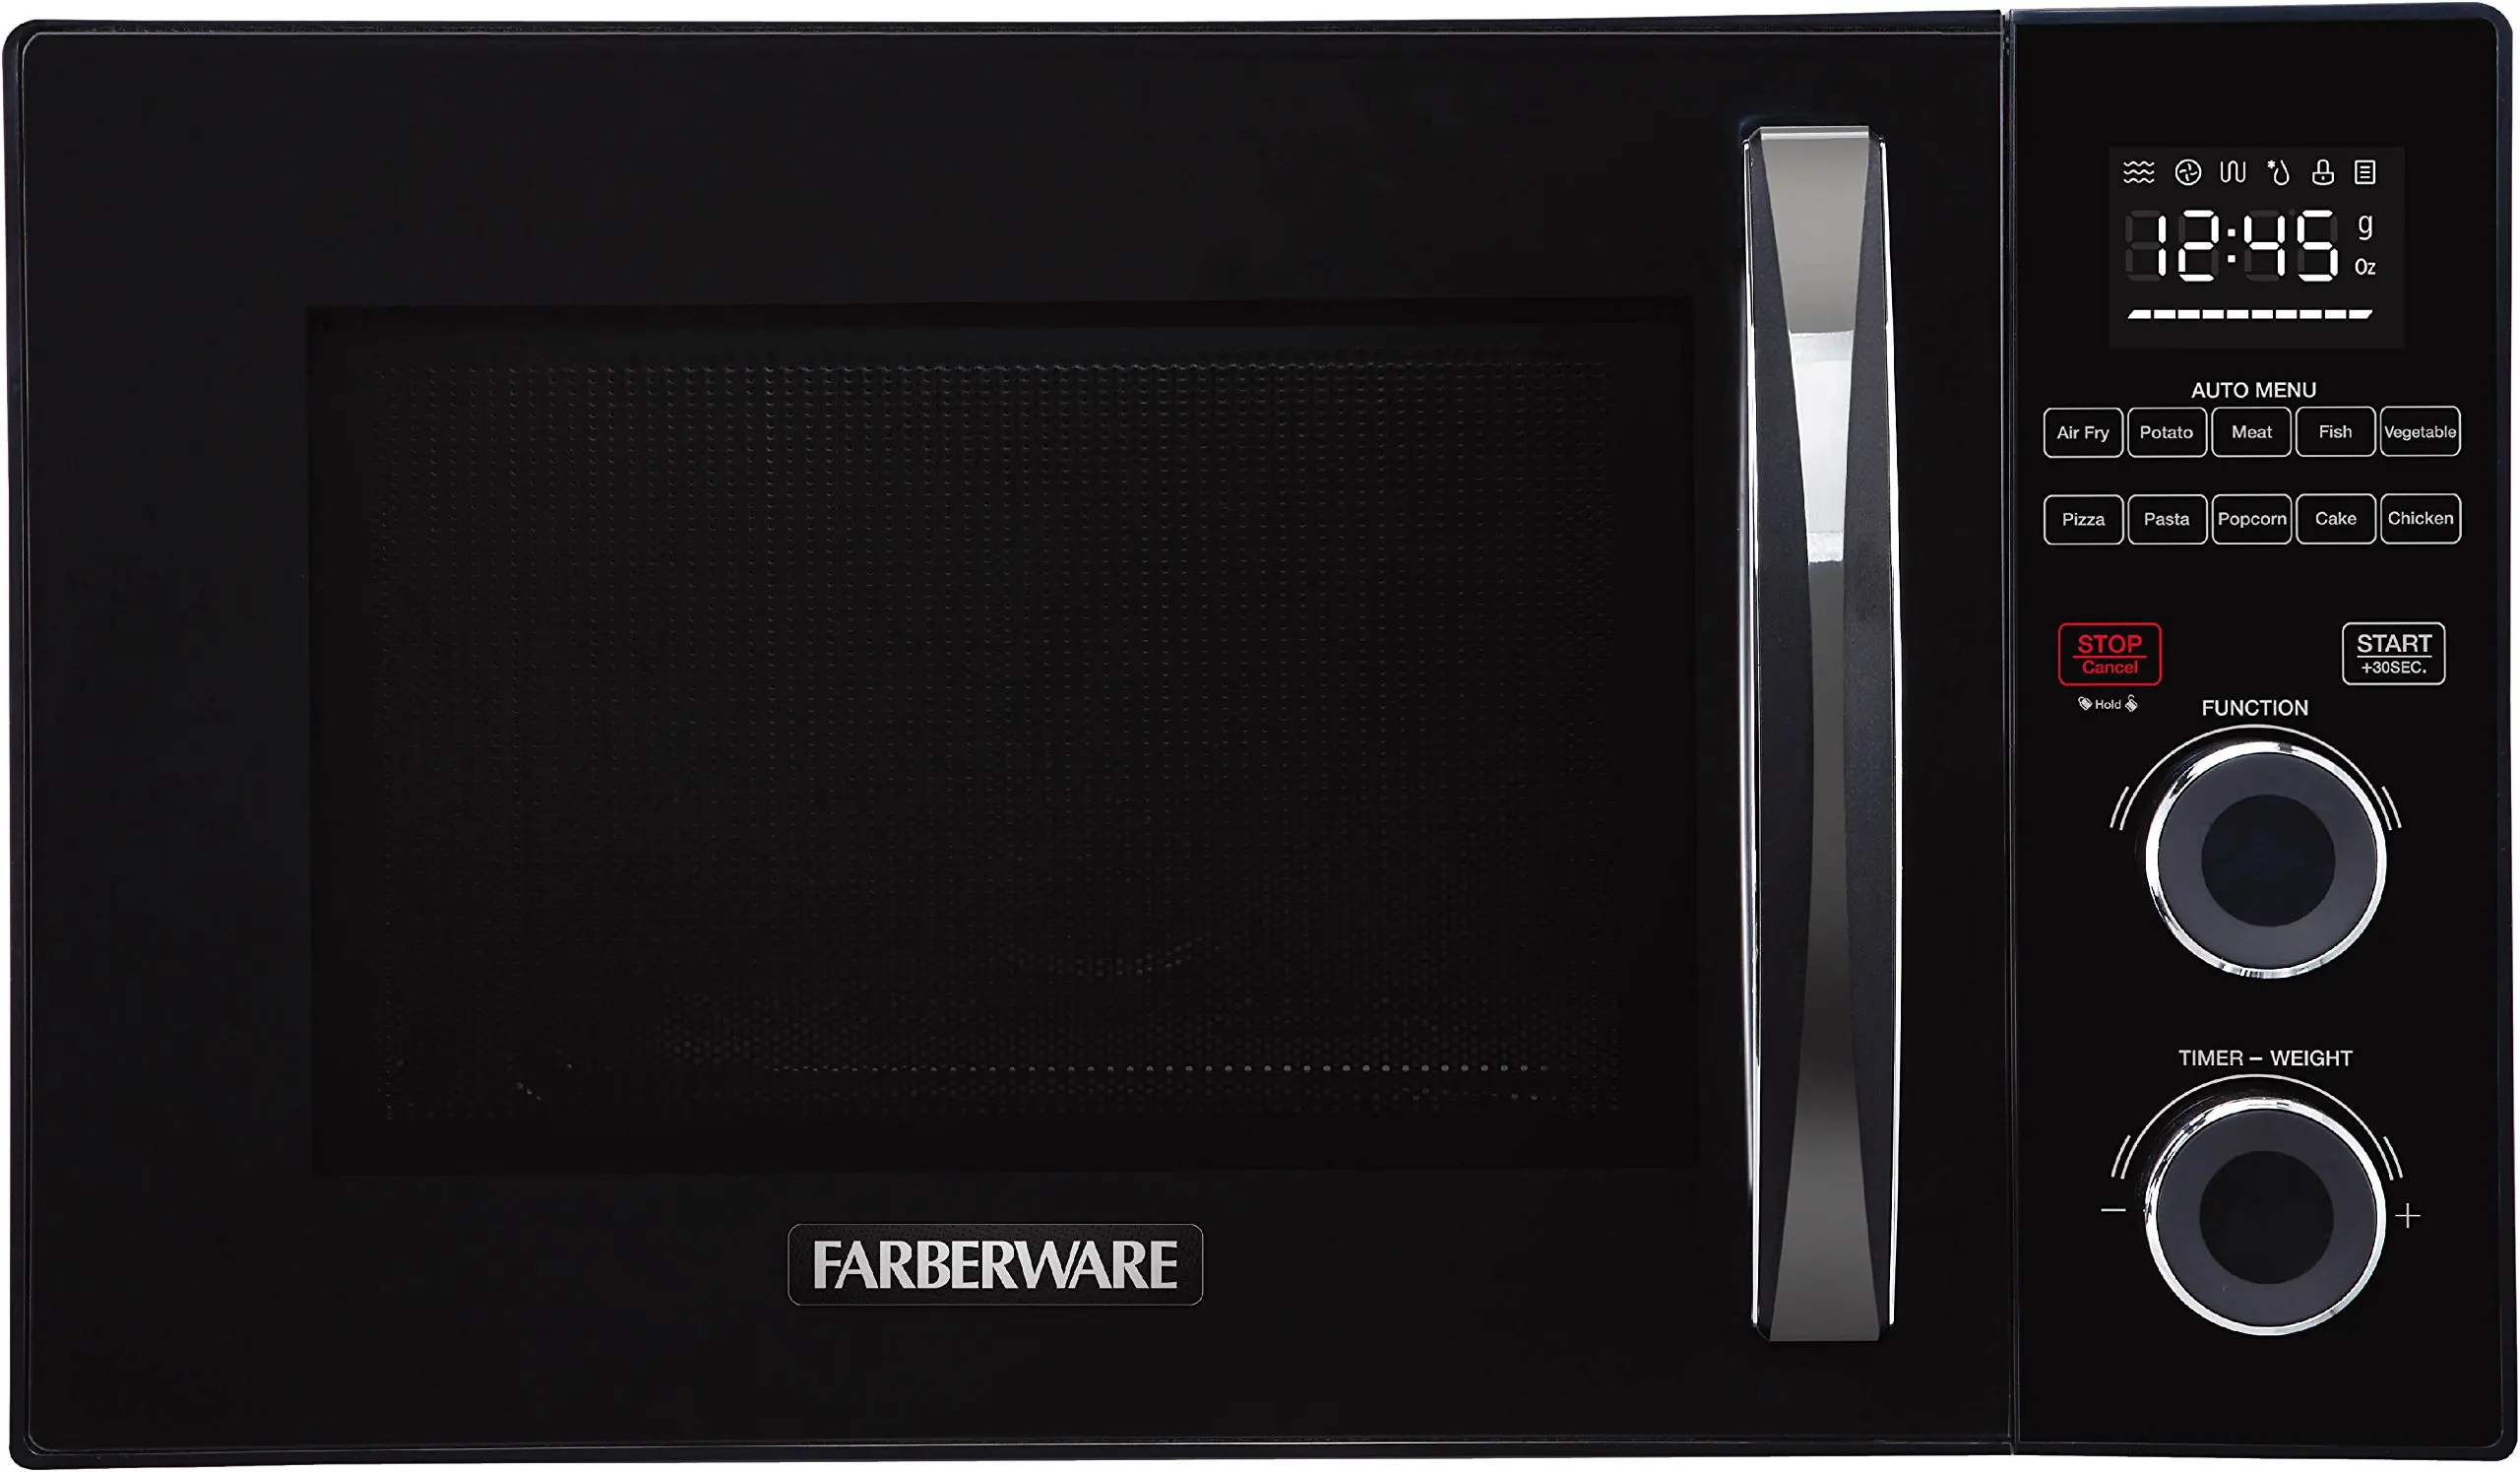 Cheap Farberware Convection Oven Parts Find Farberware Convection